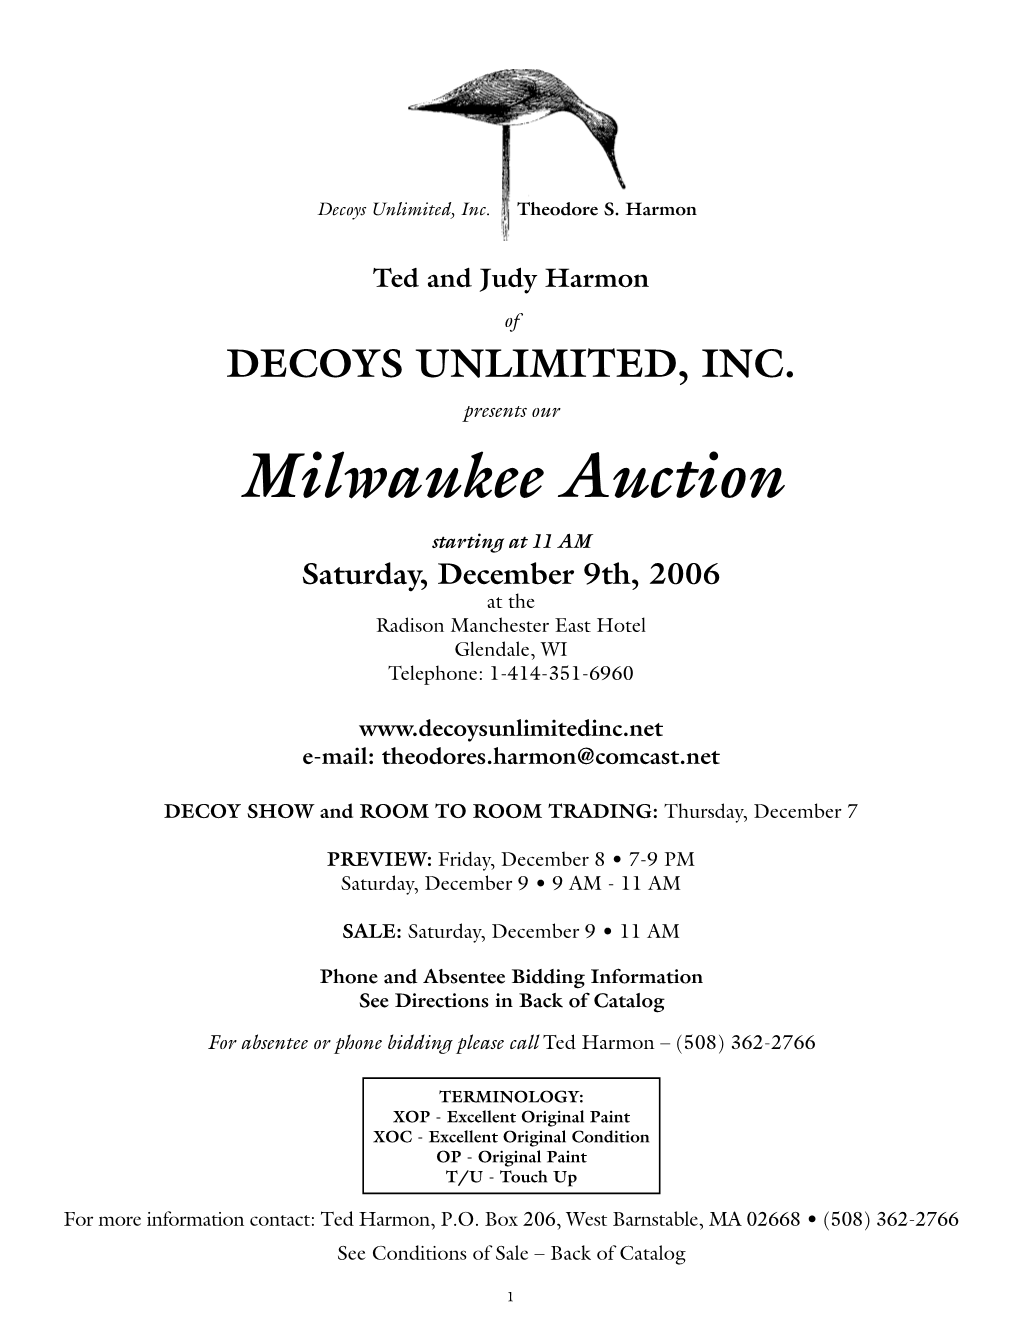 Milwaukee Auction Starting at 11 AM Saturday, December 9Th, 2006 at the Radison Manchester East Hotel Glendale, WI Telephone: 1-414-351-6960